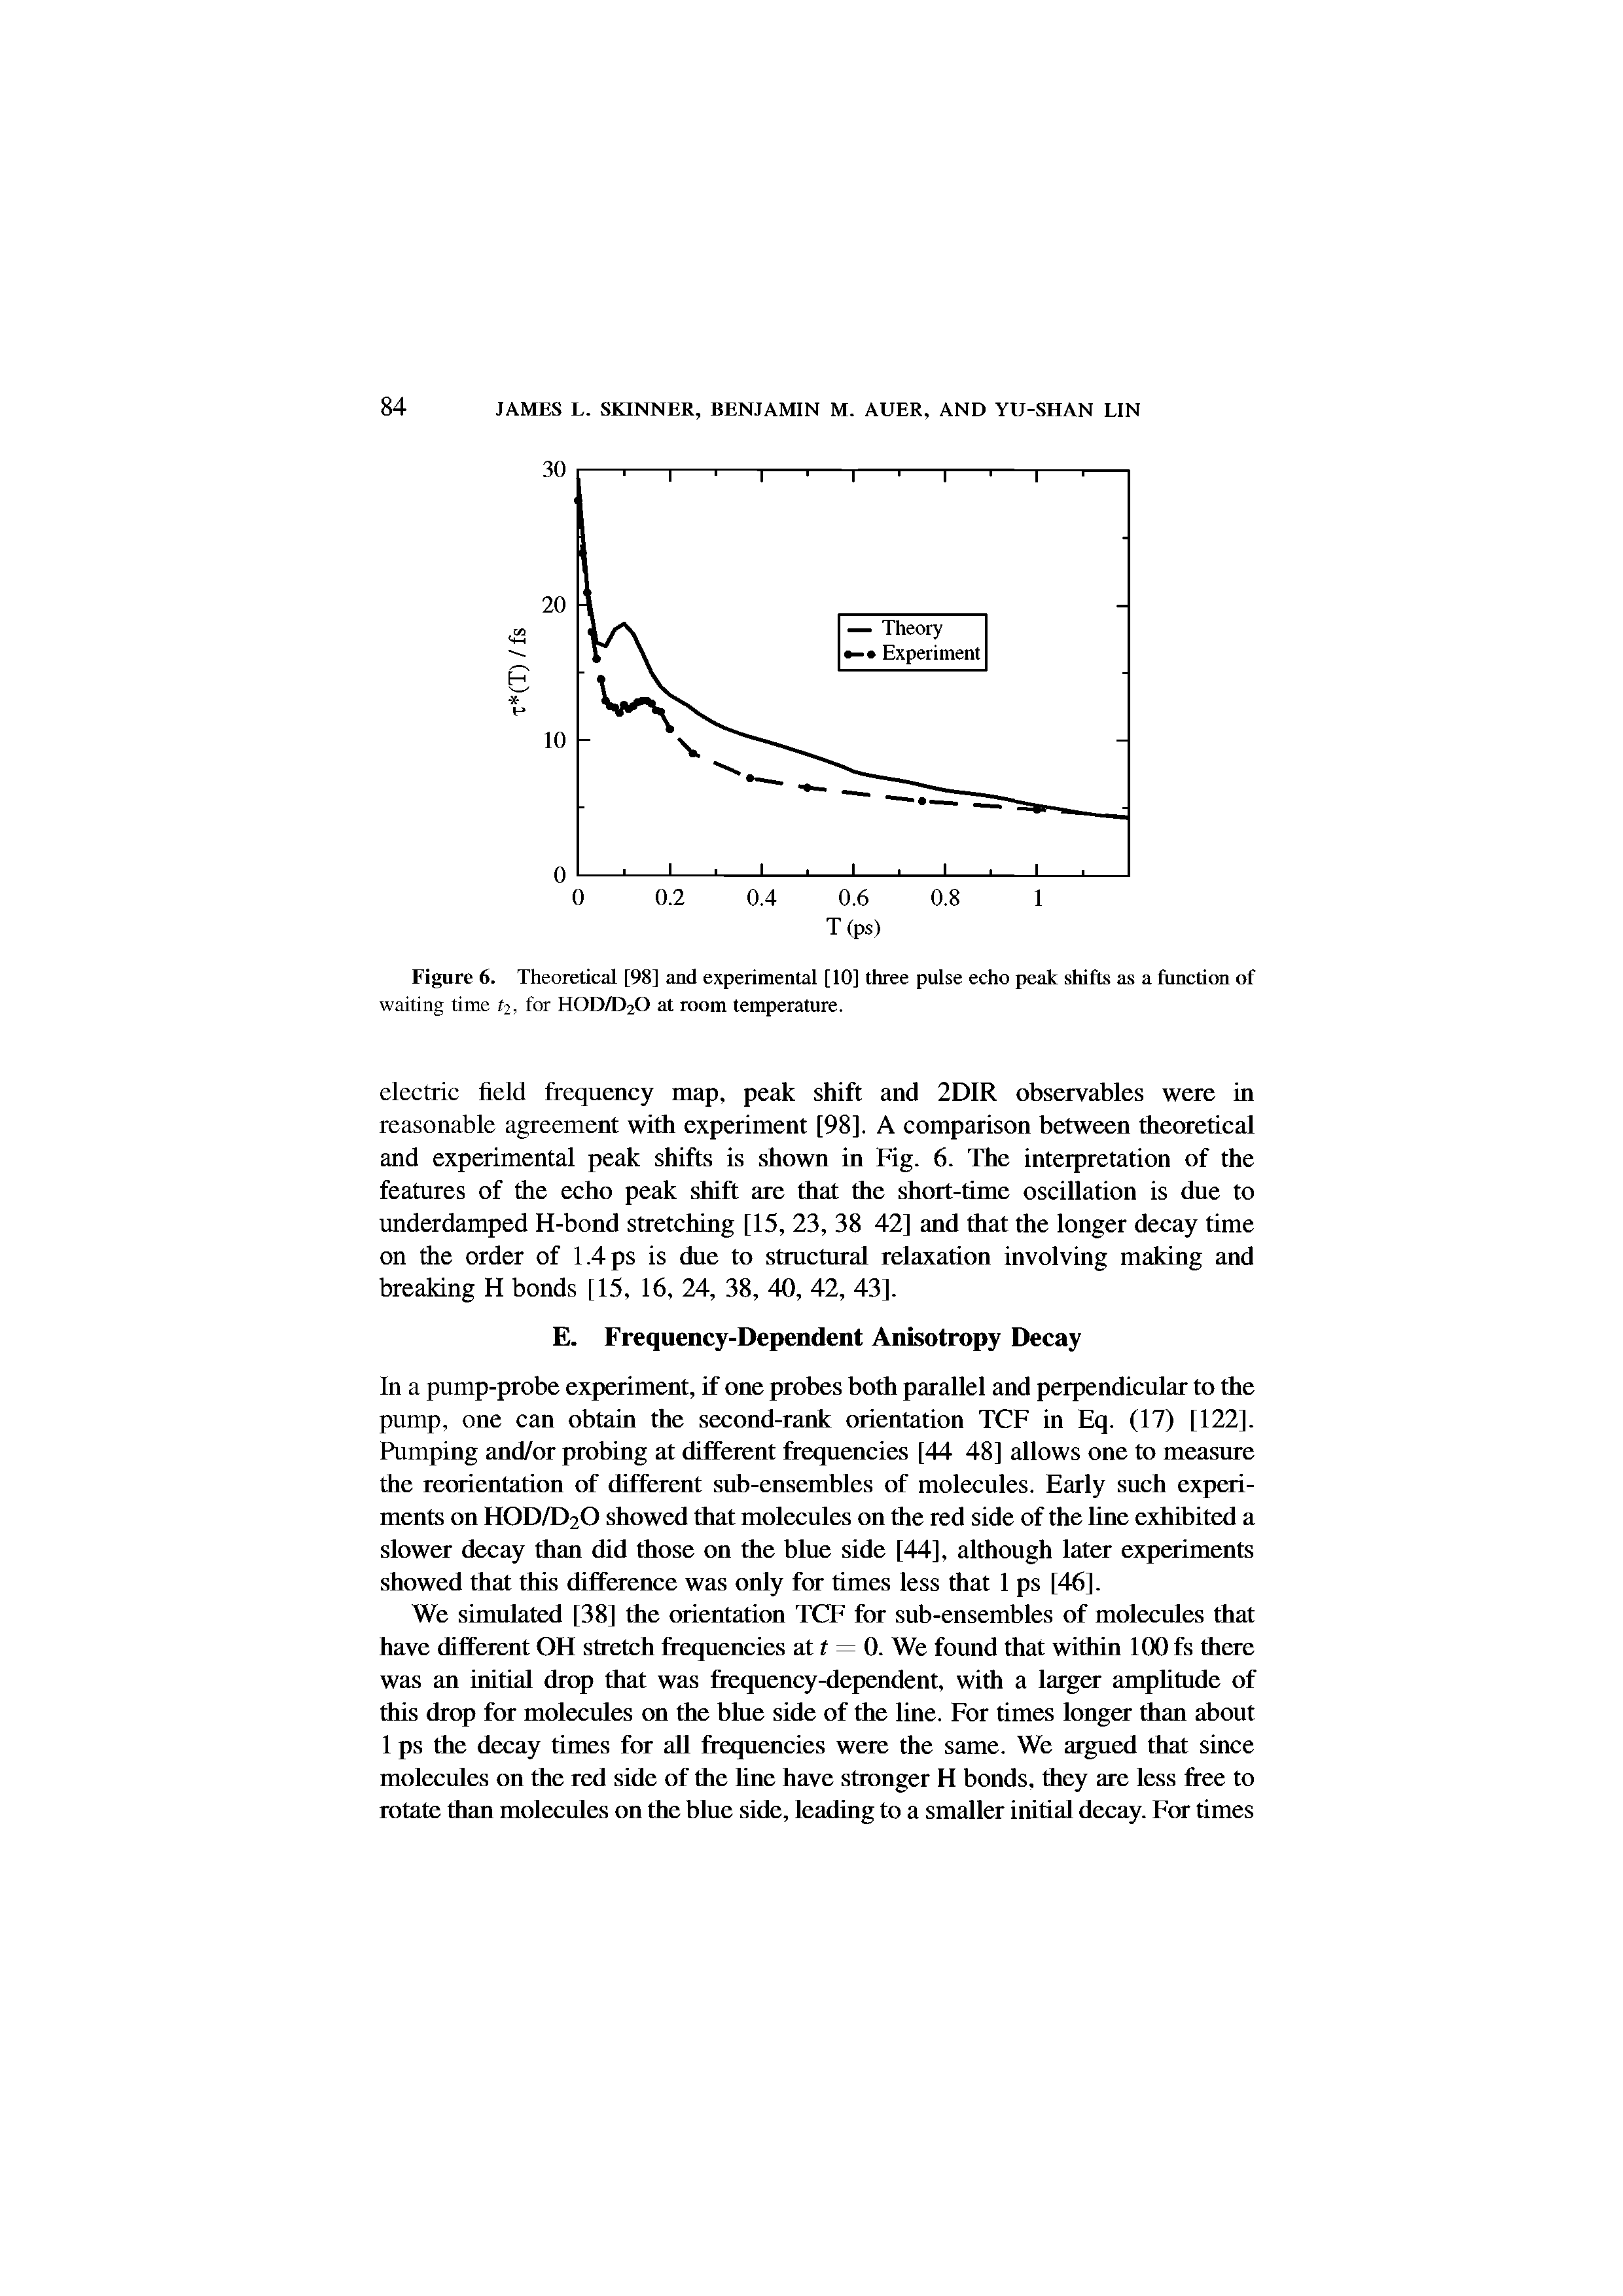 Figure 6. Theoretical [98] and experimental [10] three pulse echo peak shifts as a function of waiting time t2, for HOD/D2O at room temperature.